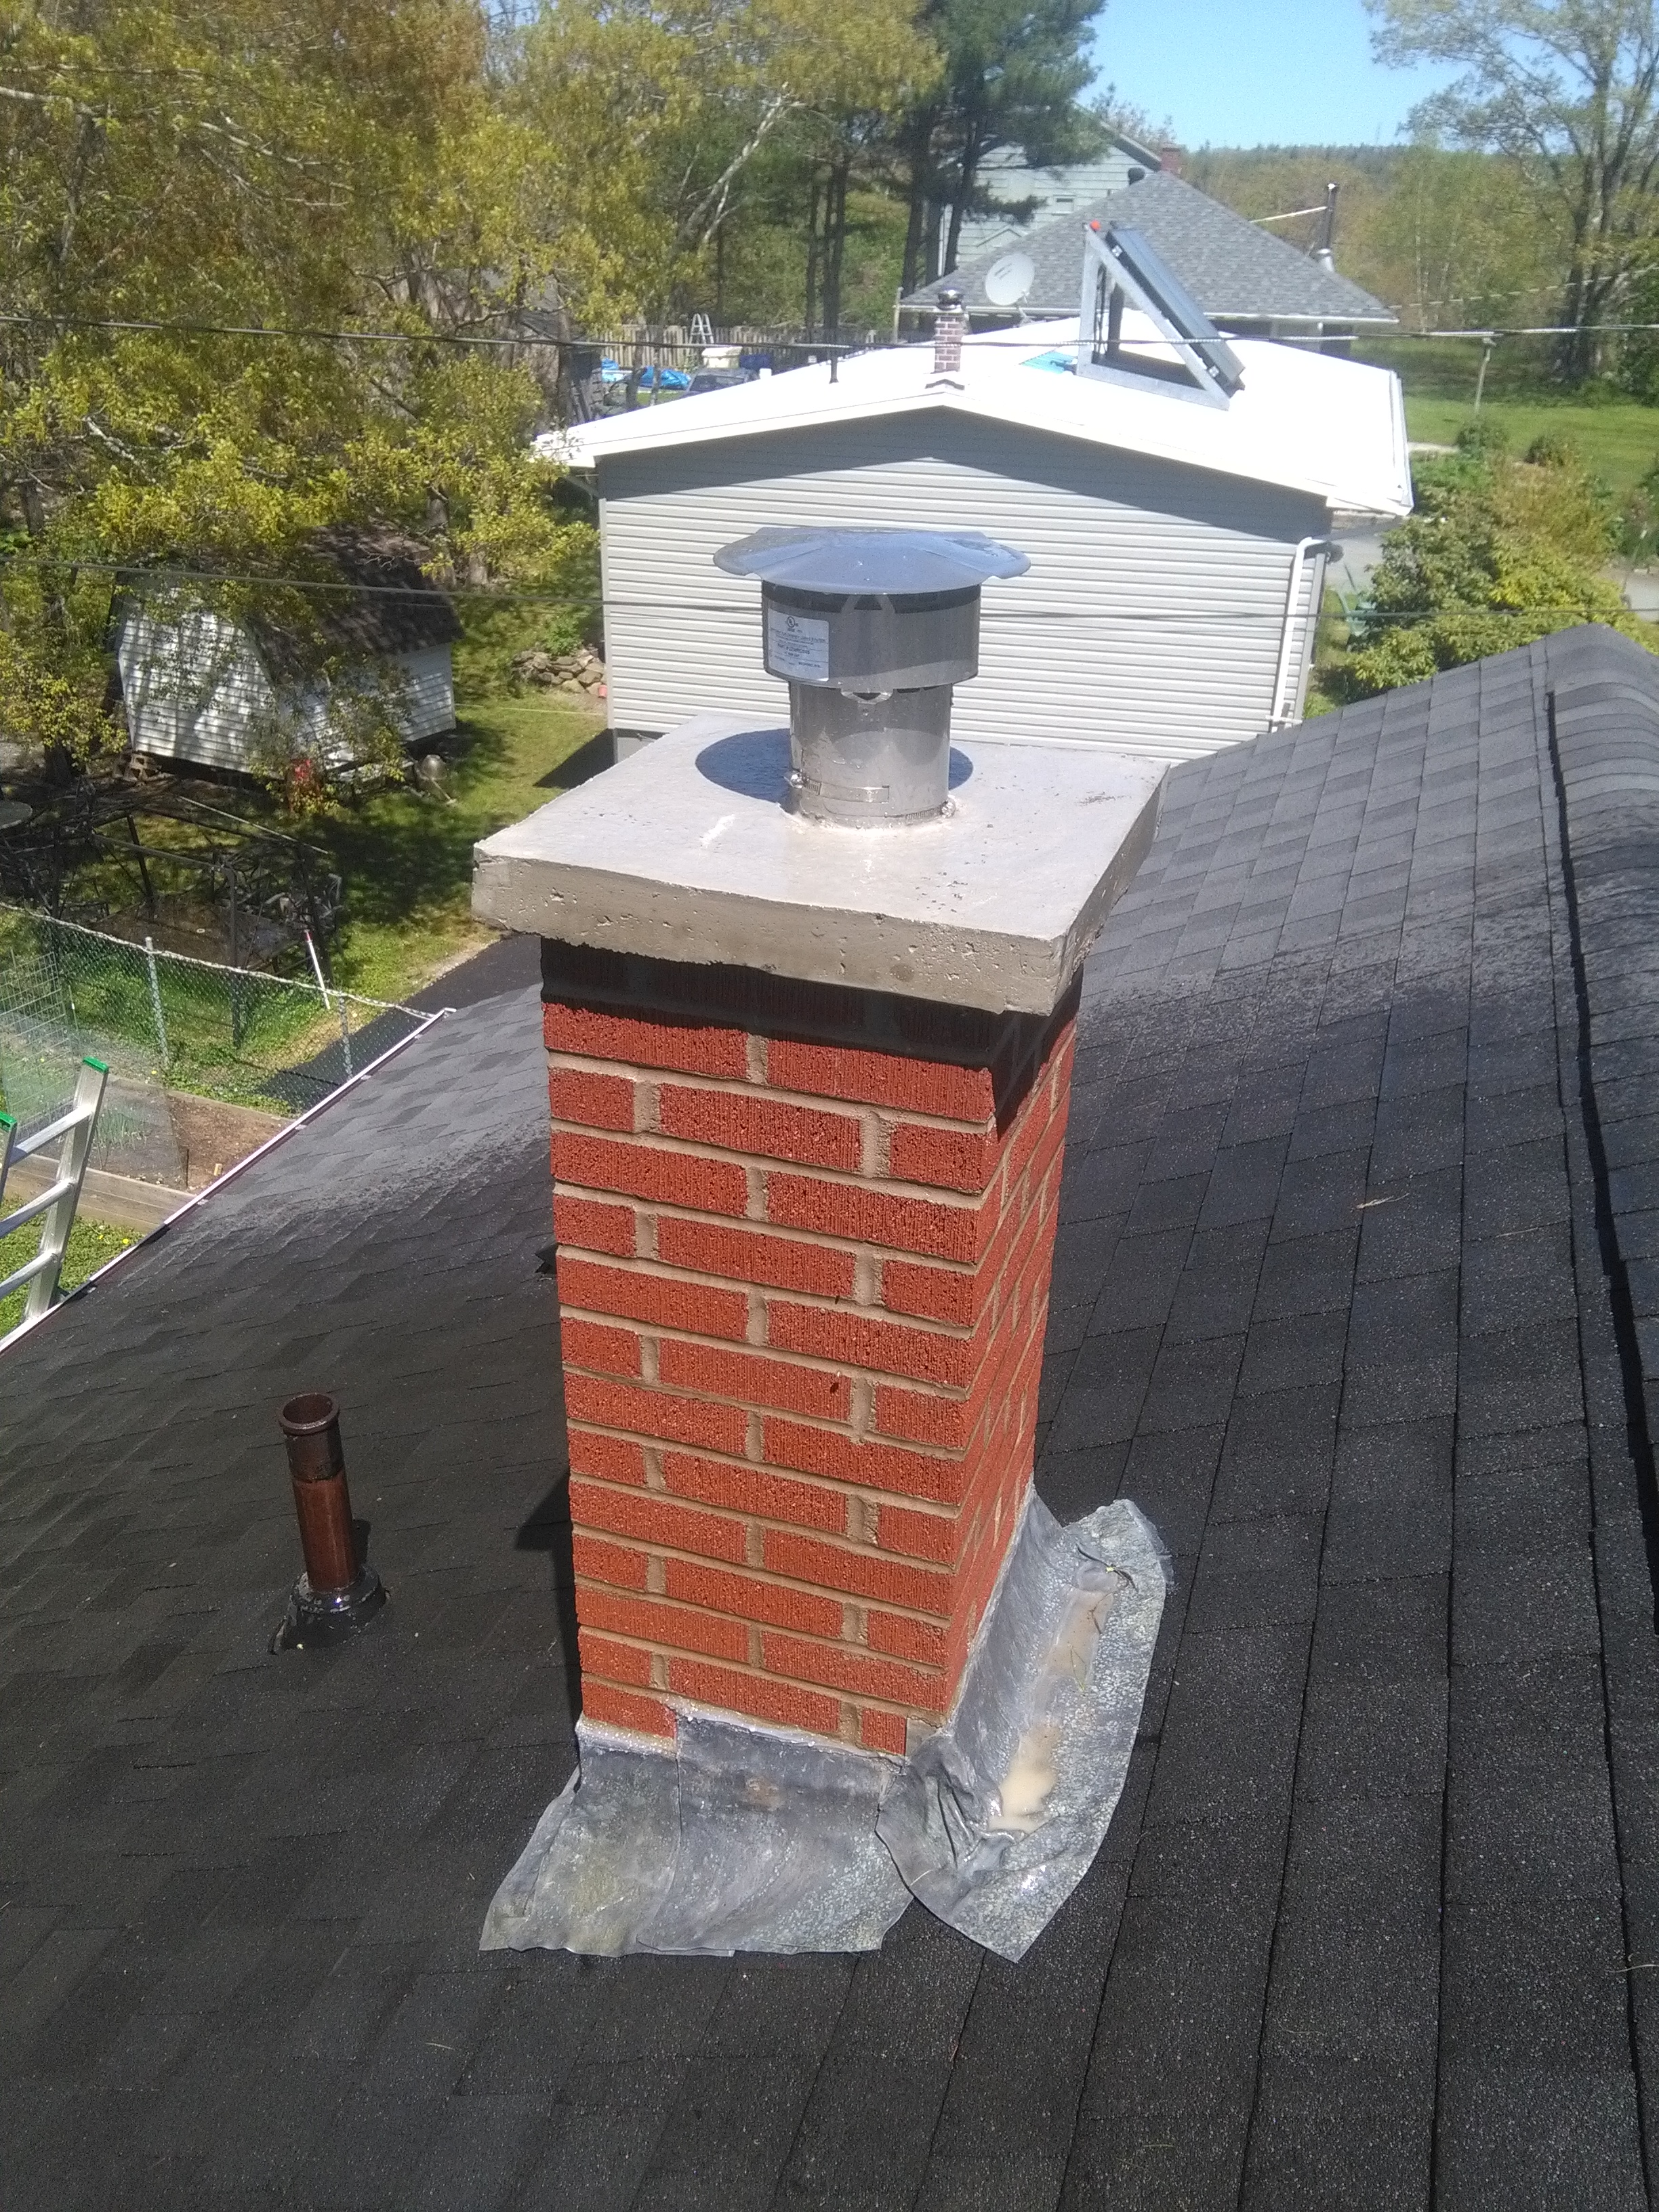 image of chimney repair-masonry chimney repair services completed in Halifax, NS by Pro Chimney Services based in Halifax, NS servicing all of the Halifax-Dartmouth Regional Municipality, Bedford, Sackville, Mount Uniacke, Hantsport, Windsor, Wolfville, Kentville, Chester Basin, Mahone Bay, Lunenburg, Bridgewater, Liverpool, Fall River, Wellington, Enfield, Elmsdale, Brookfield, Truro, Musquodoboit Harbour & surrounding areass.